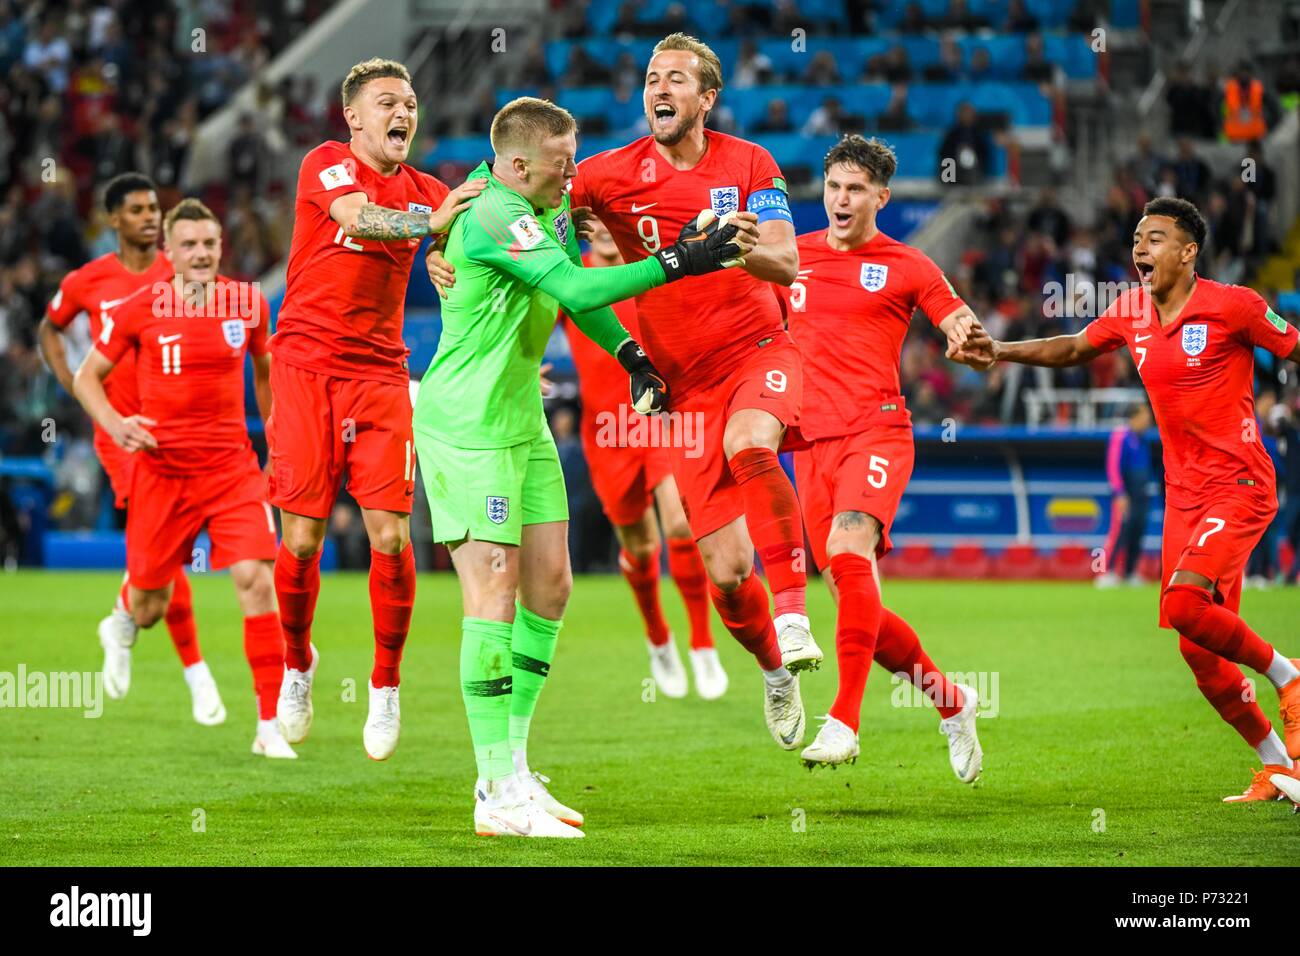 Moscow, Russia. July 03, 2018: Jordan Pickford of England, Kieran Trippier of England and Harry Kane of England celebrating the win.at Spartak Stadium during the round of 16 match between England and Colombia during the 2018 World Cup. Ulrik Pedersen/CSM Credit: Cal Sport Media/Alamy Live News Stock Photo